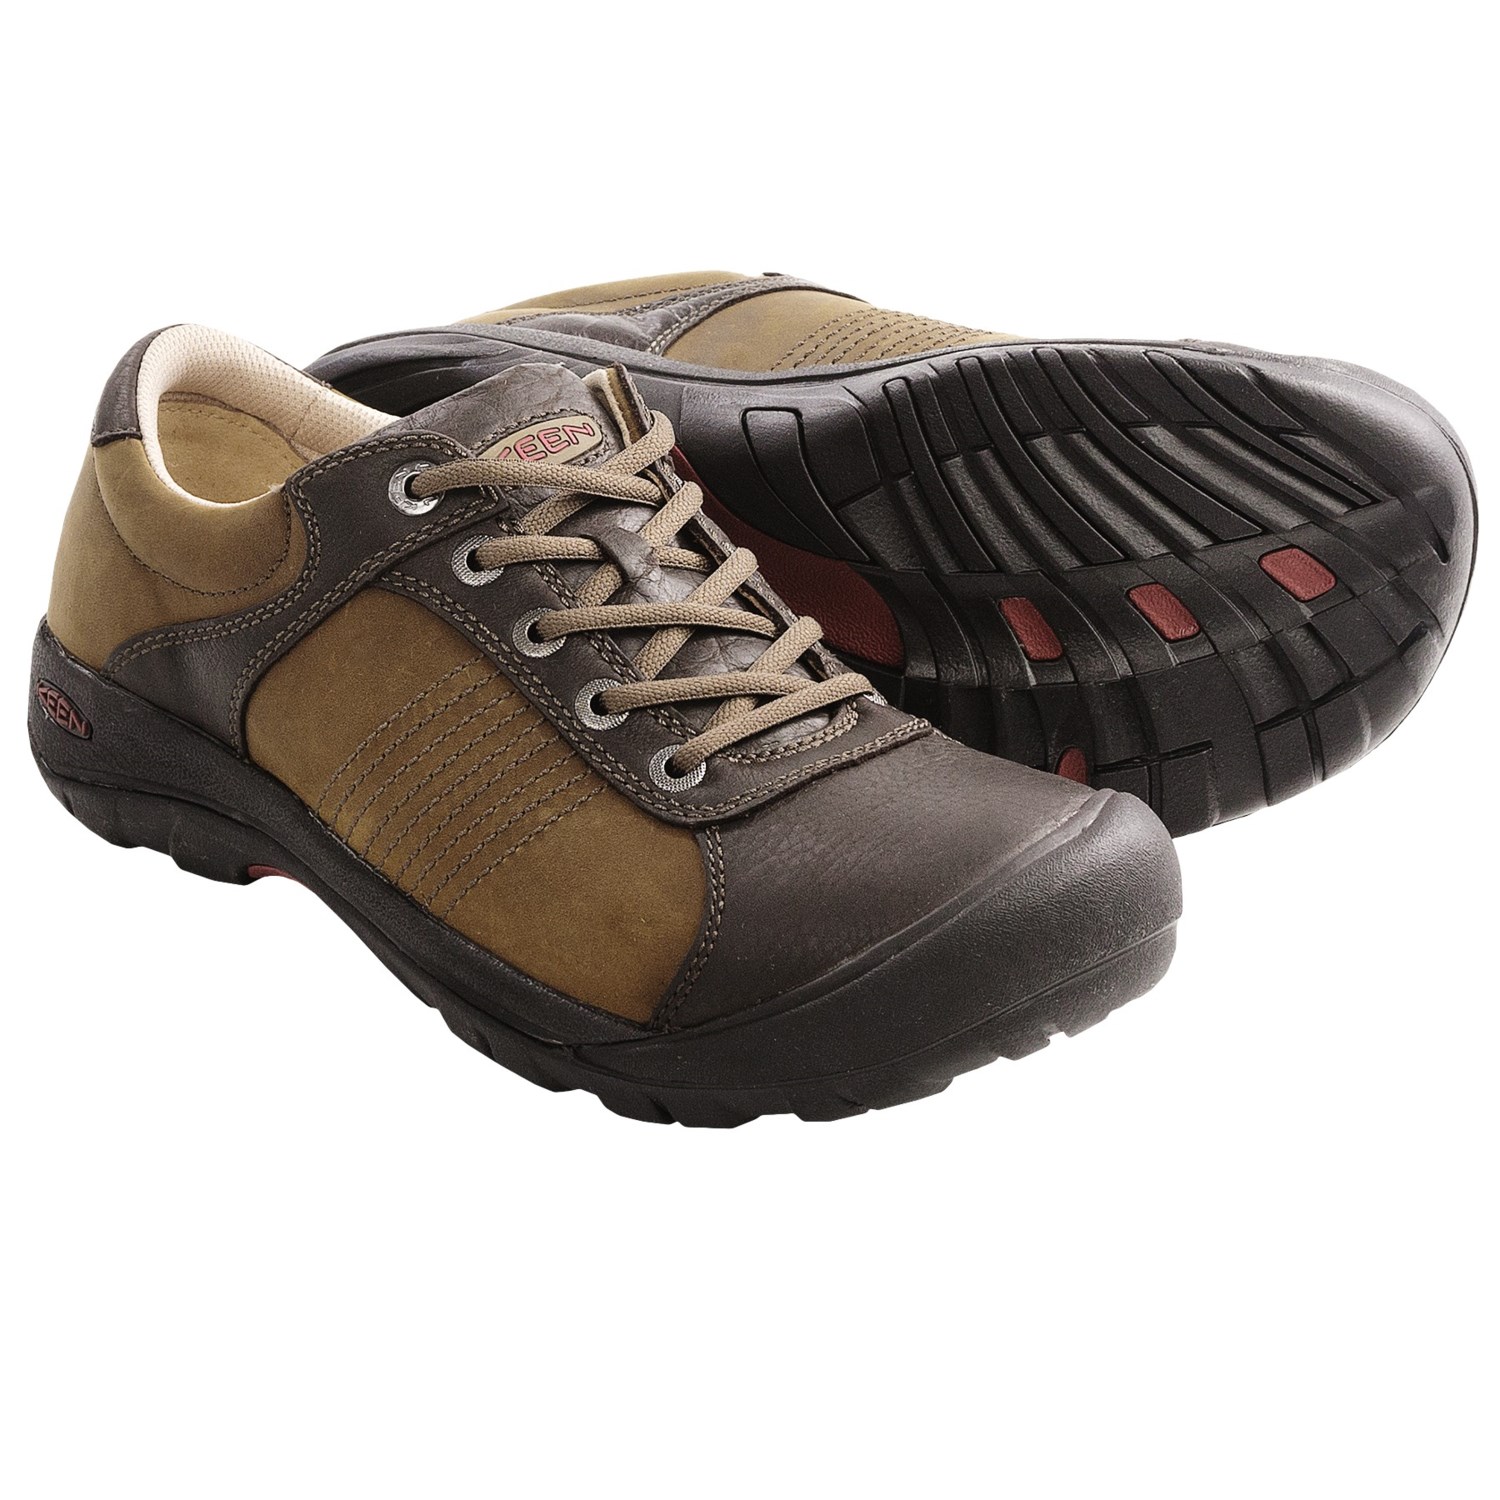 Keen Finlay Shoes (For Men) - Save 24%